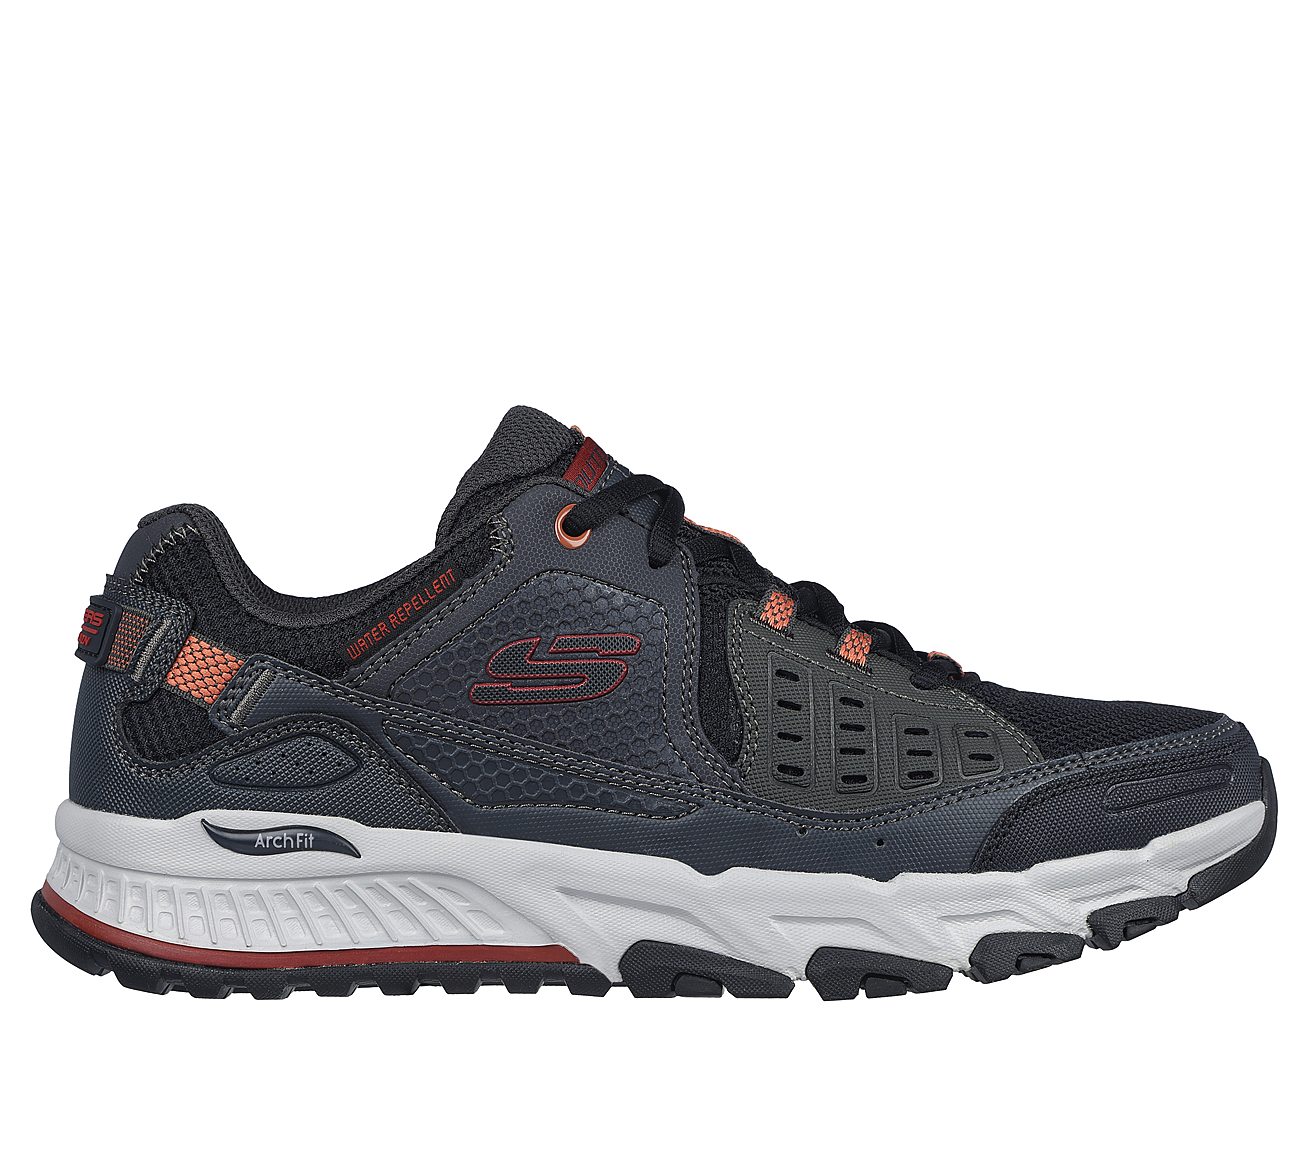 ARCH FIT ESCAPE PLAN, NAVY/CHARCOAL Footwear Lateral View